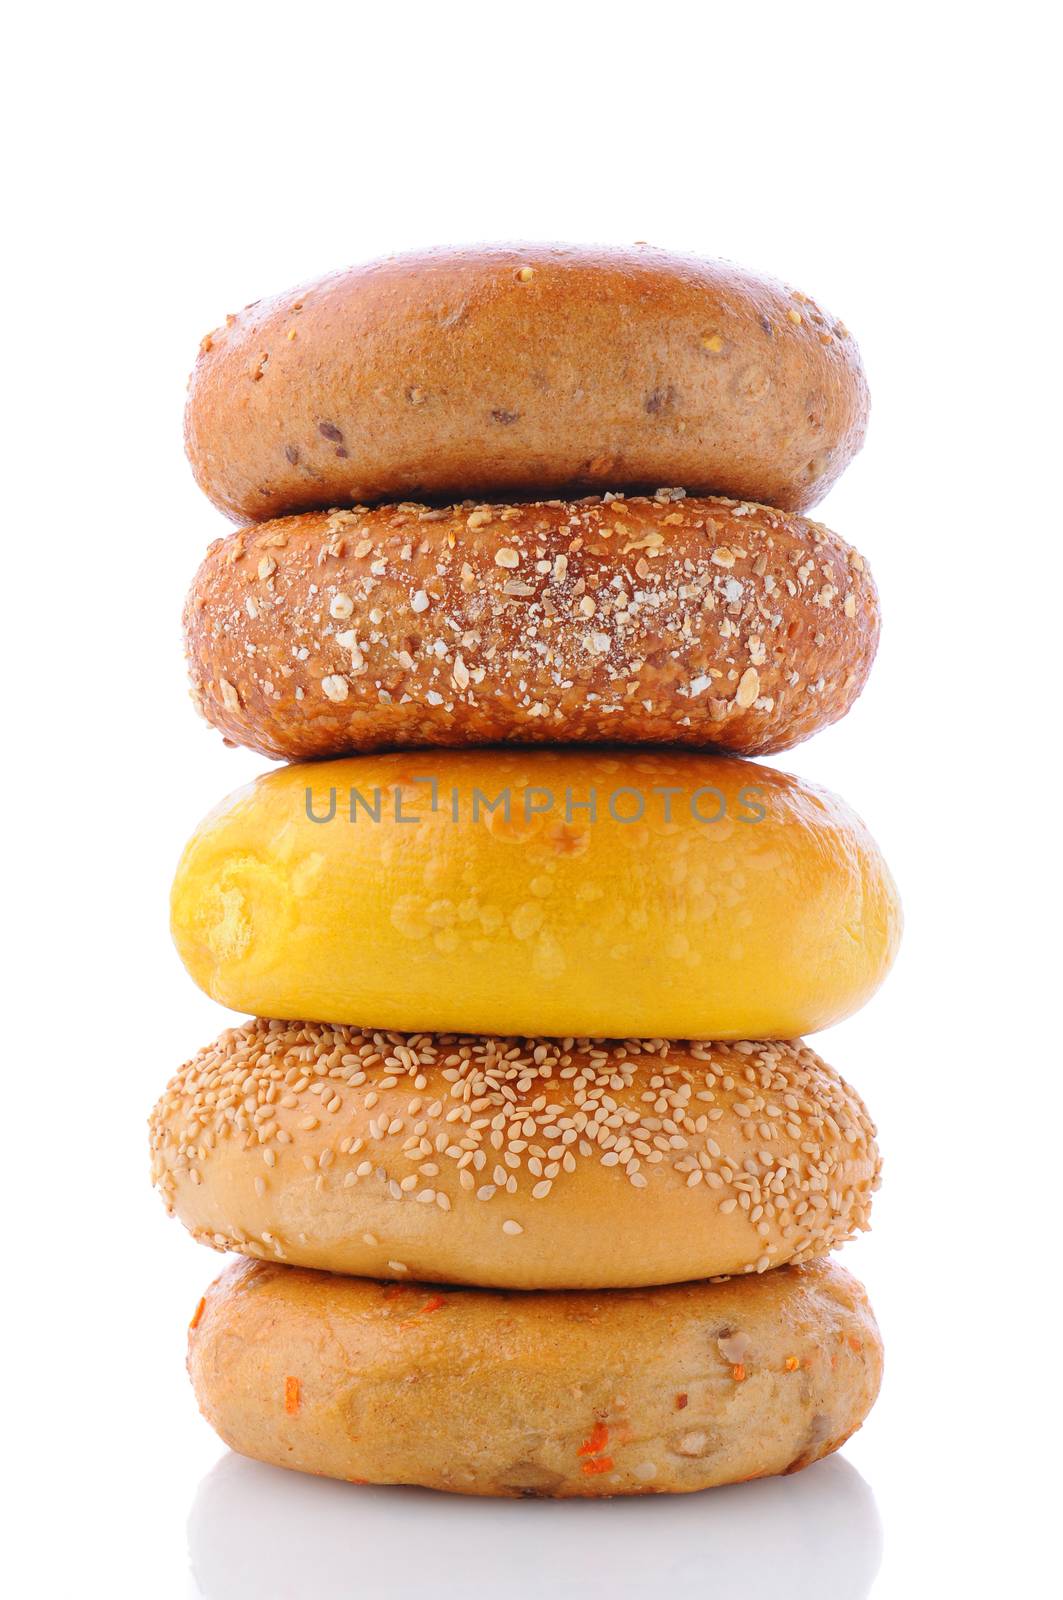 A stack of five different bagels on a white background with reflection. Bagels include: sesame seed, cinnamon raisin, multi grain, egg, and everything.